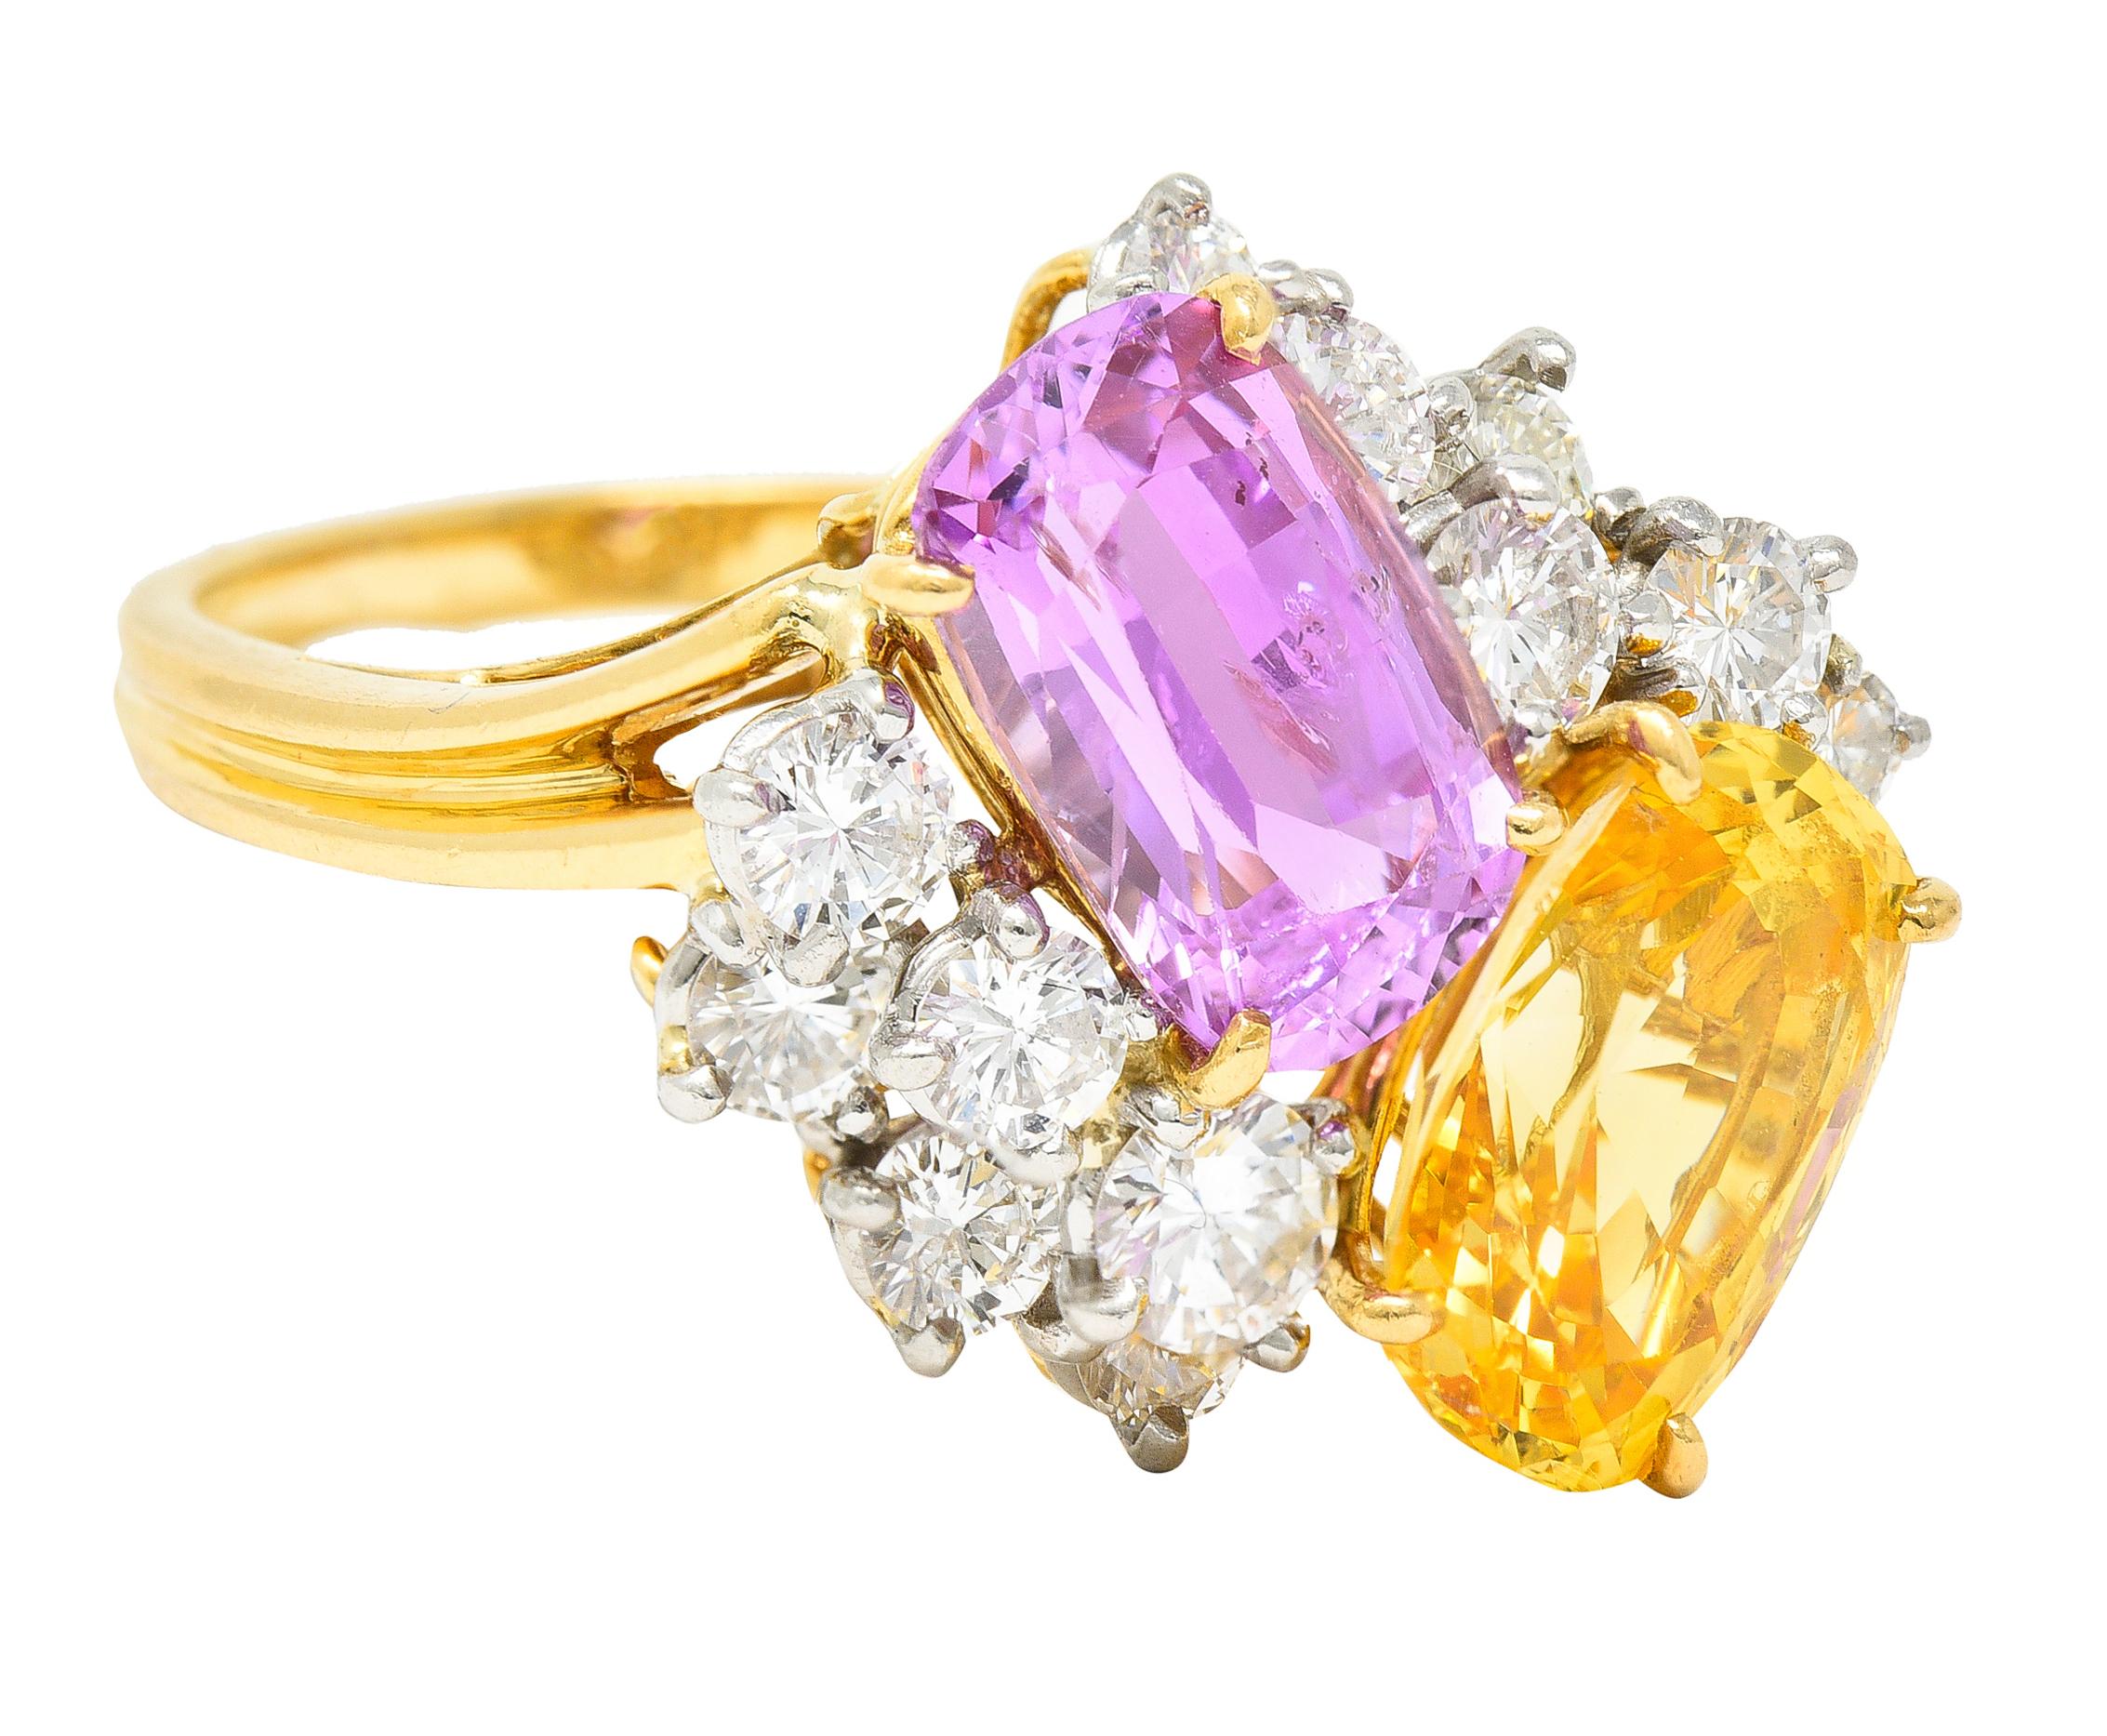 Designed as juxtaposed cushion cut pink and yellow sapphires clustered with round brilliant cut diamonds. Pink sapphire is prong set and weighs approximately 4.15 carats total - light violetish pink. Yellow sapphire is prong set and weighs